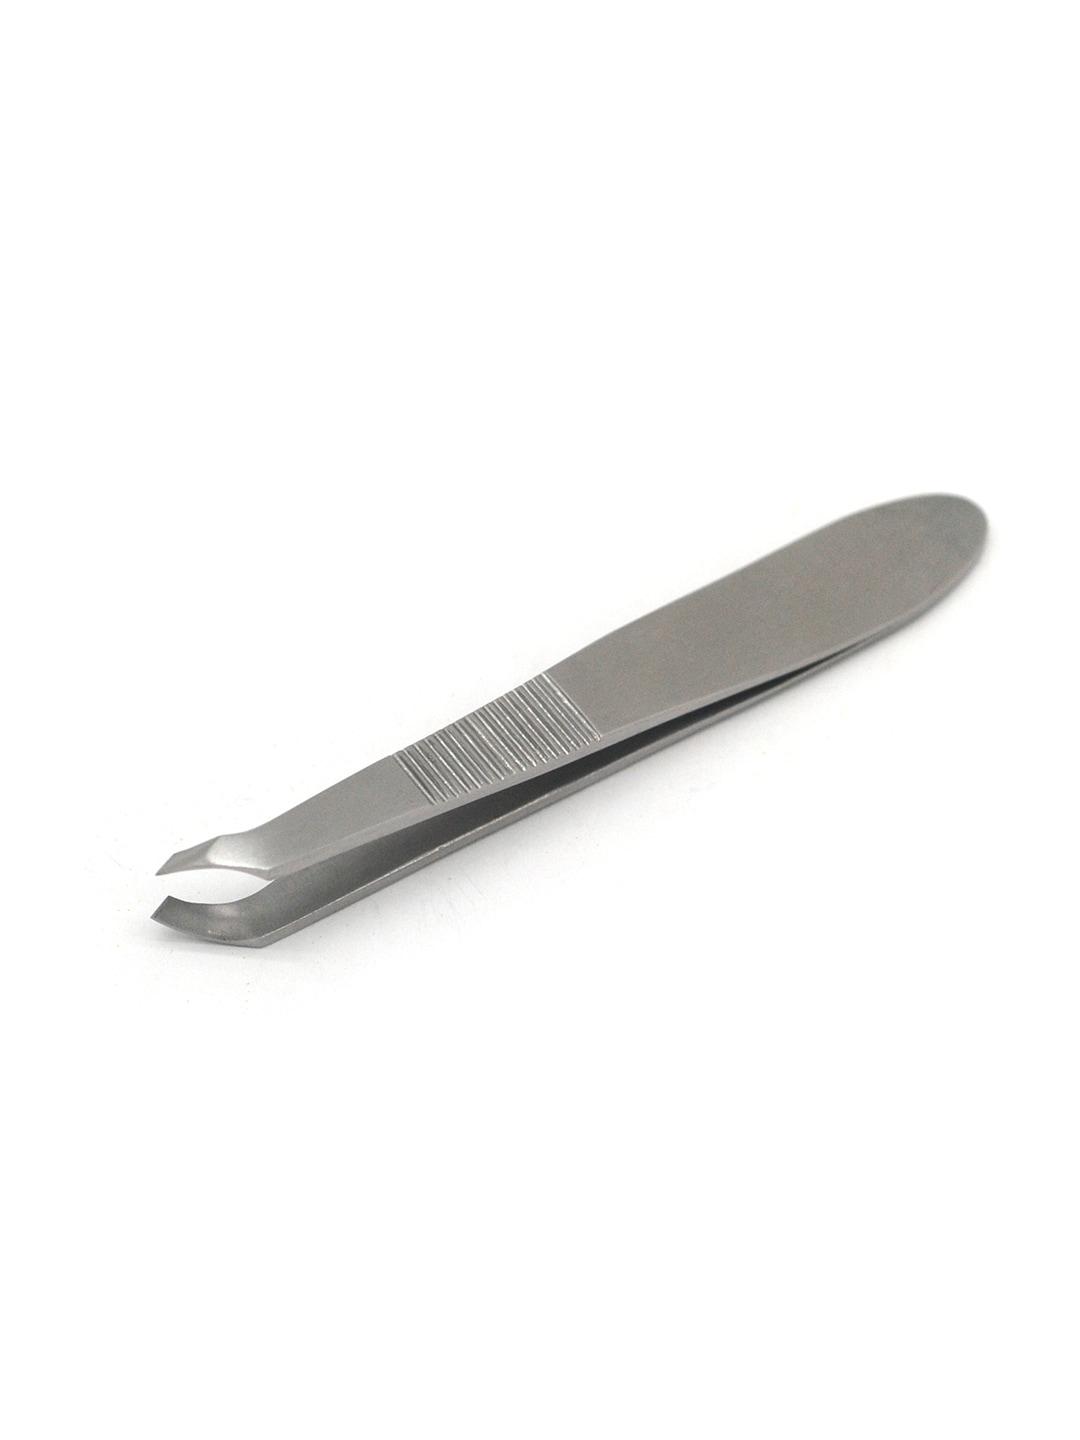 basicare Signature Stainless Steel Cuticle Tweezers with Drawstring Pouch